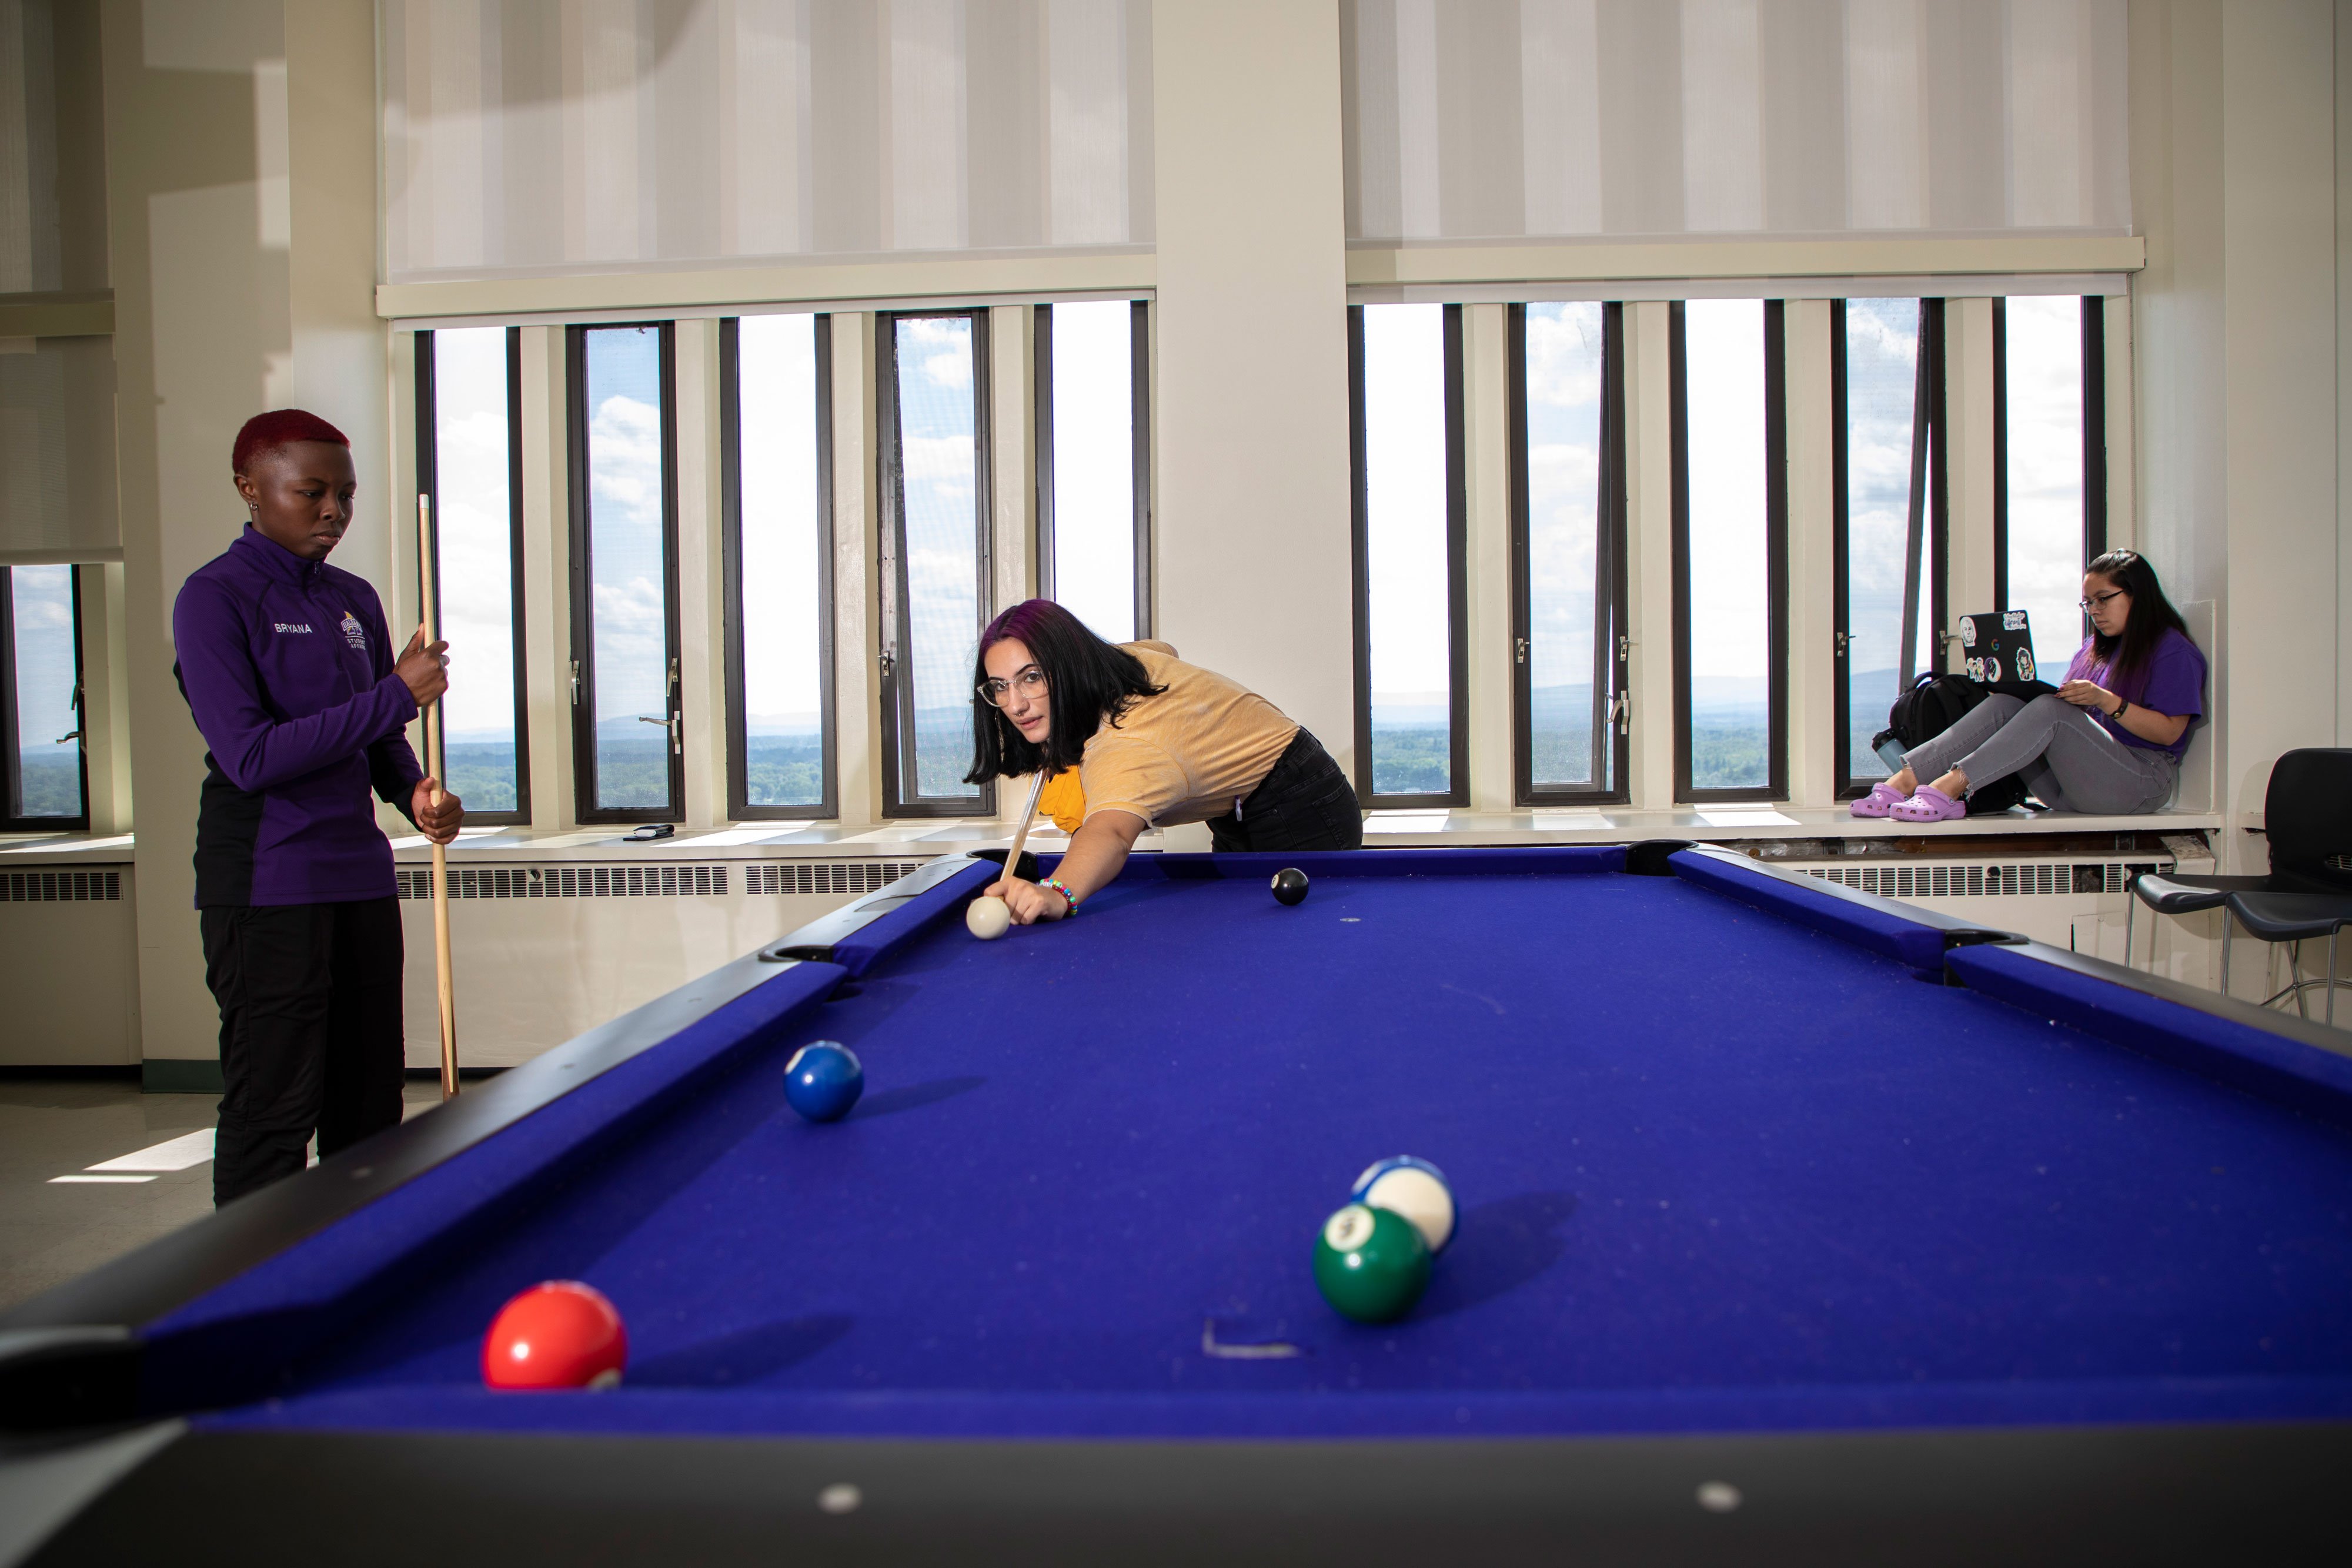 Two students play billiards on a blue pool table, while another student works on her laptop while perched on a window sill overlooking a view of Albany